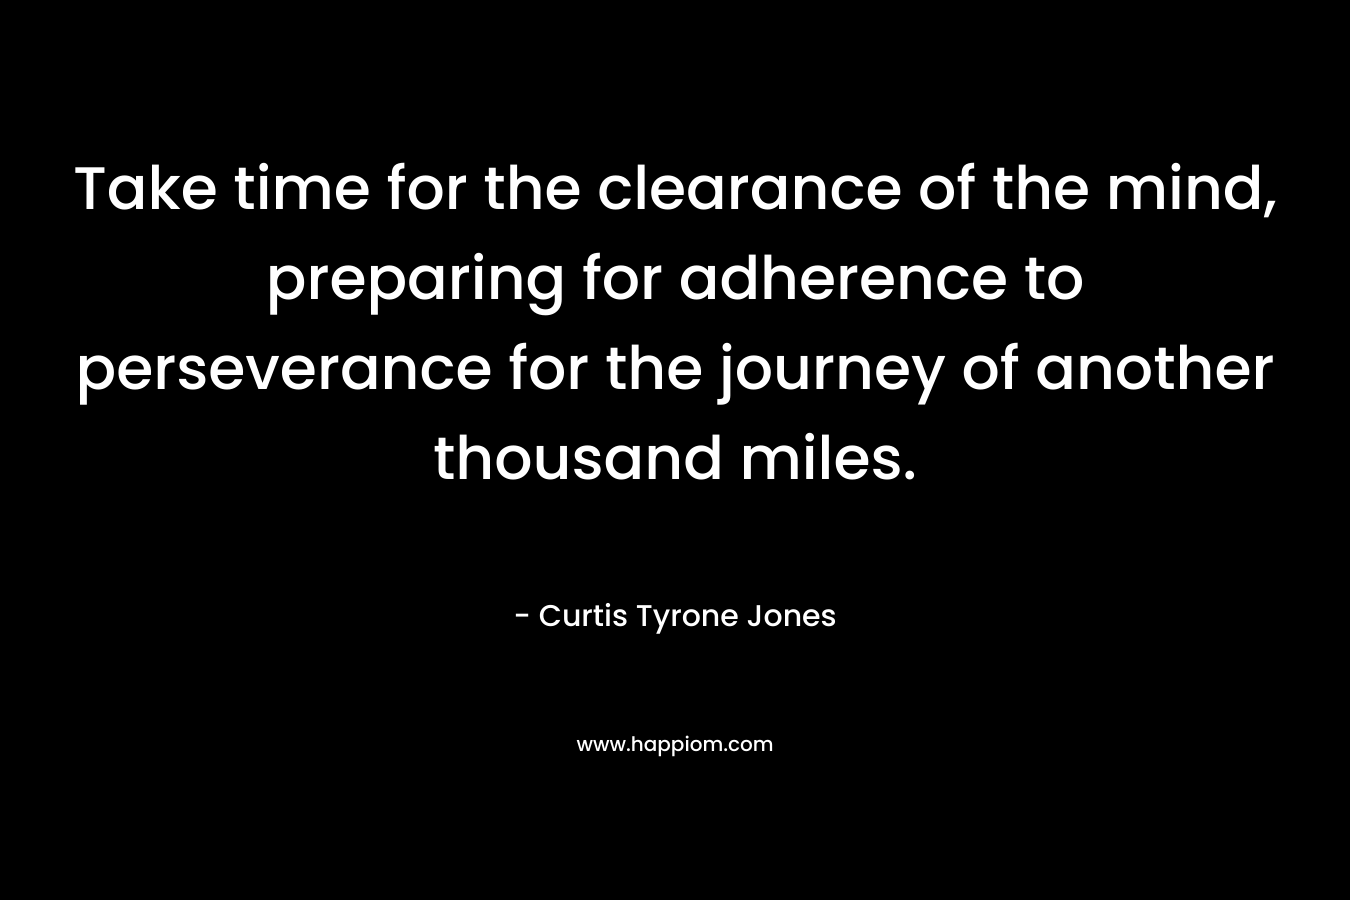 Take time for the clearance of the mind, preparing for adherence to perseverance for the journey of another thousand miles. – Curtis Tyrone Jones